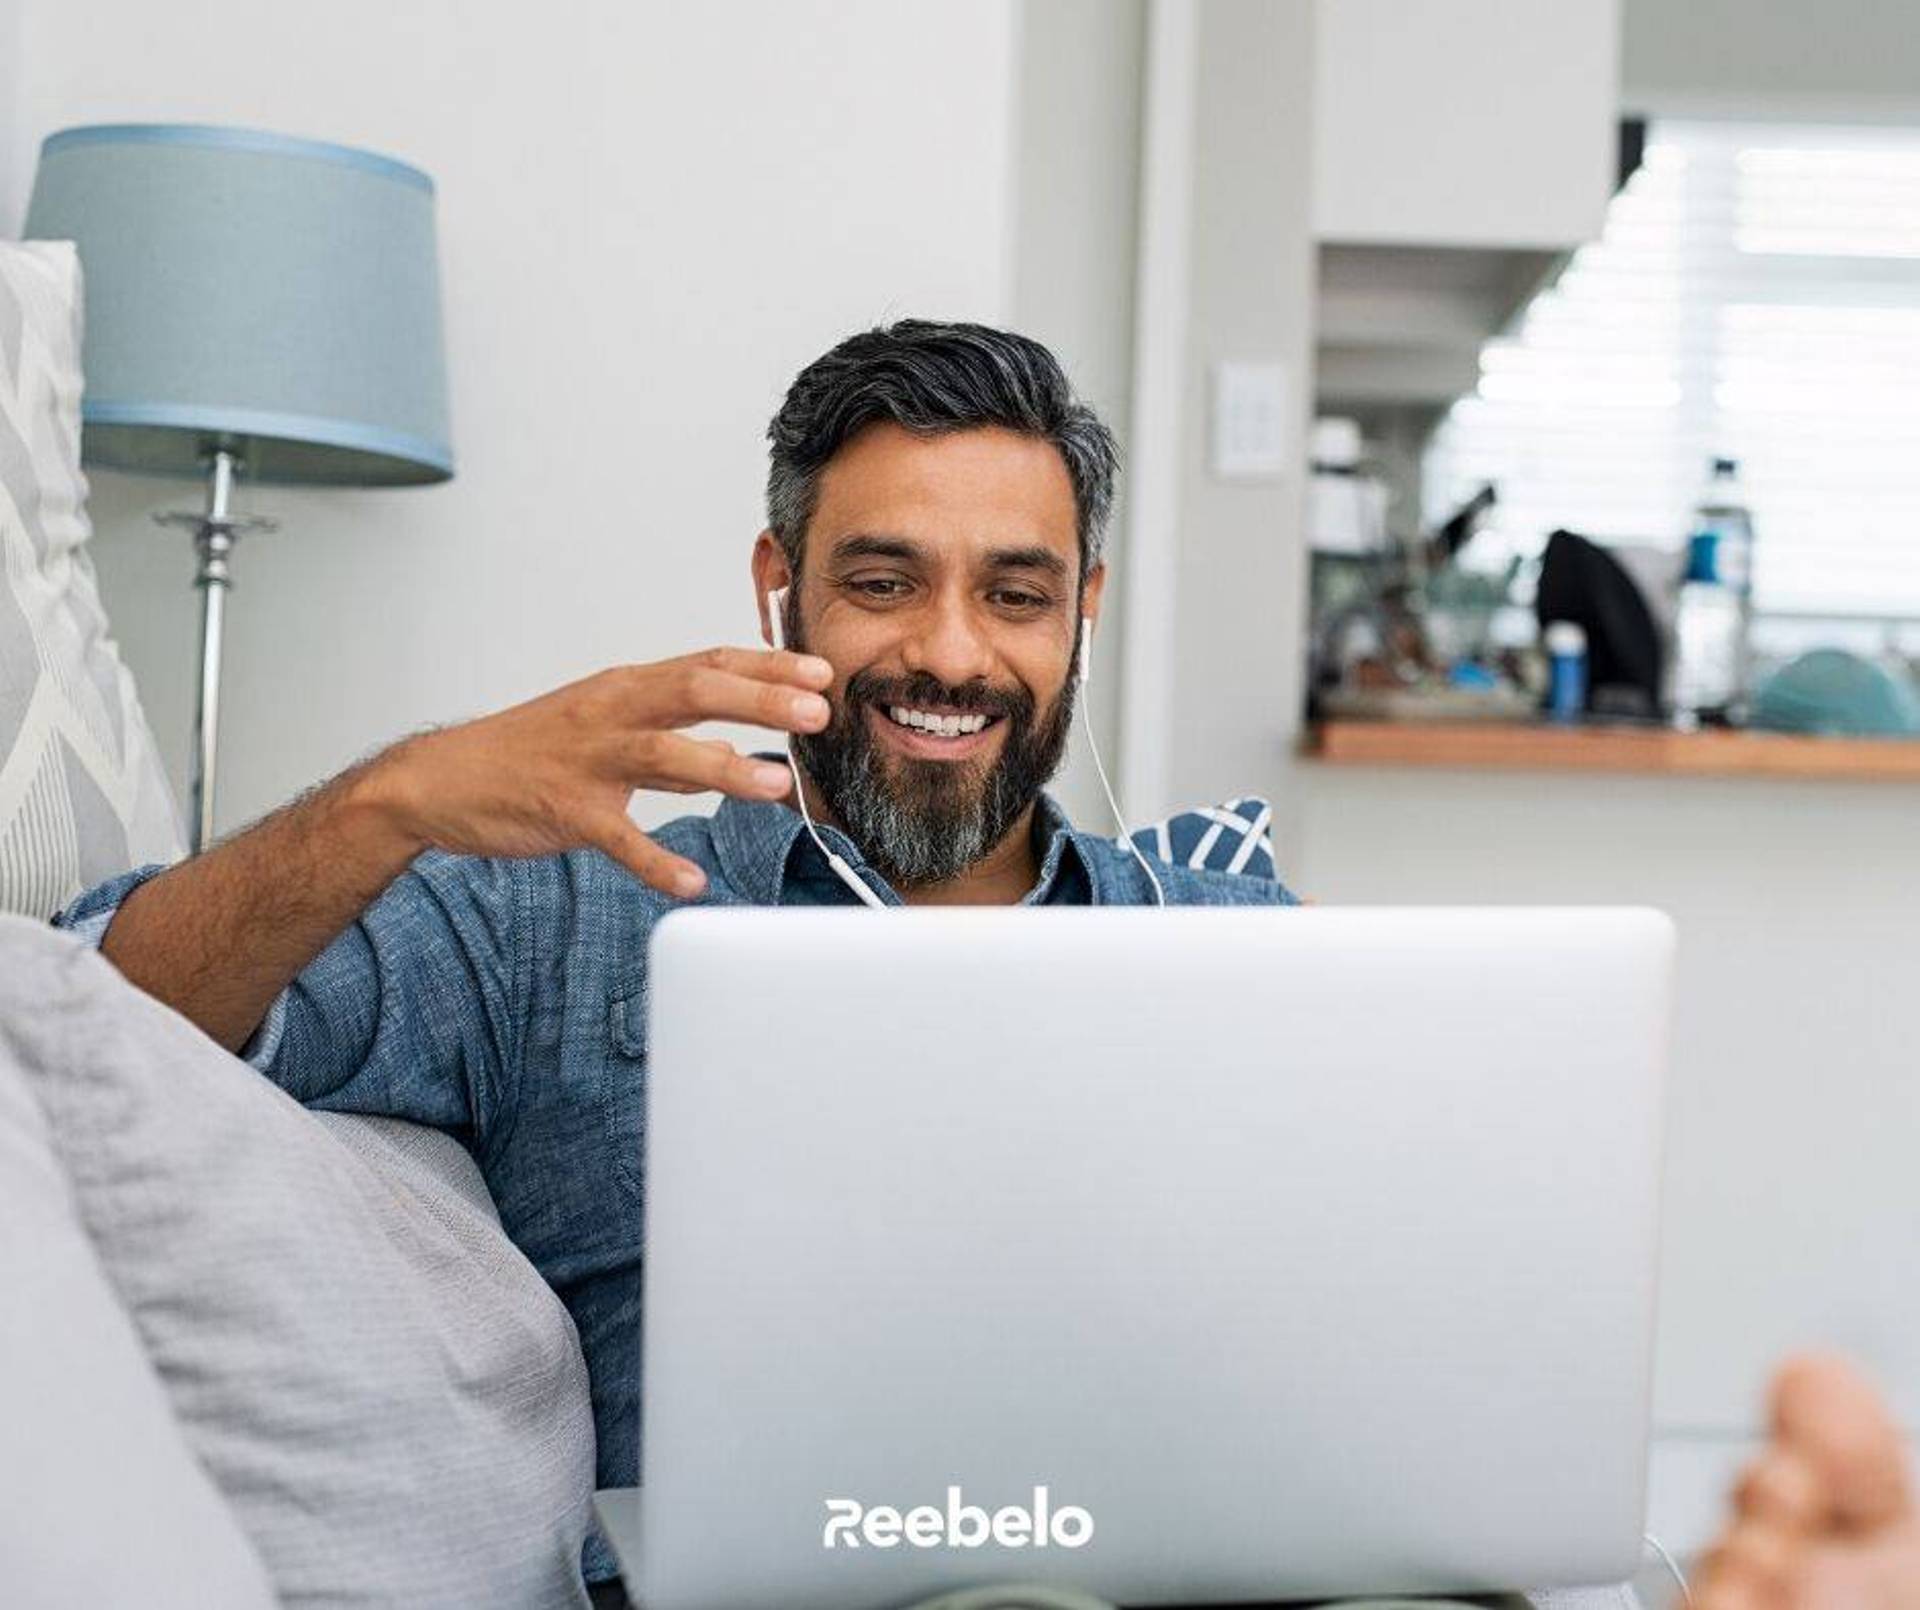 Reebelo’s refurbished tech reduces e-waste in Asia